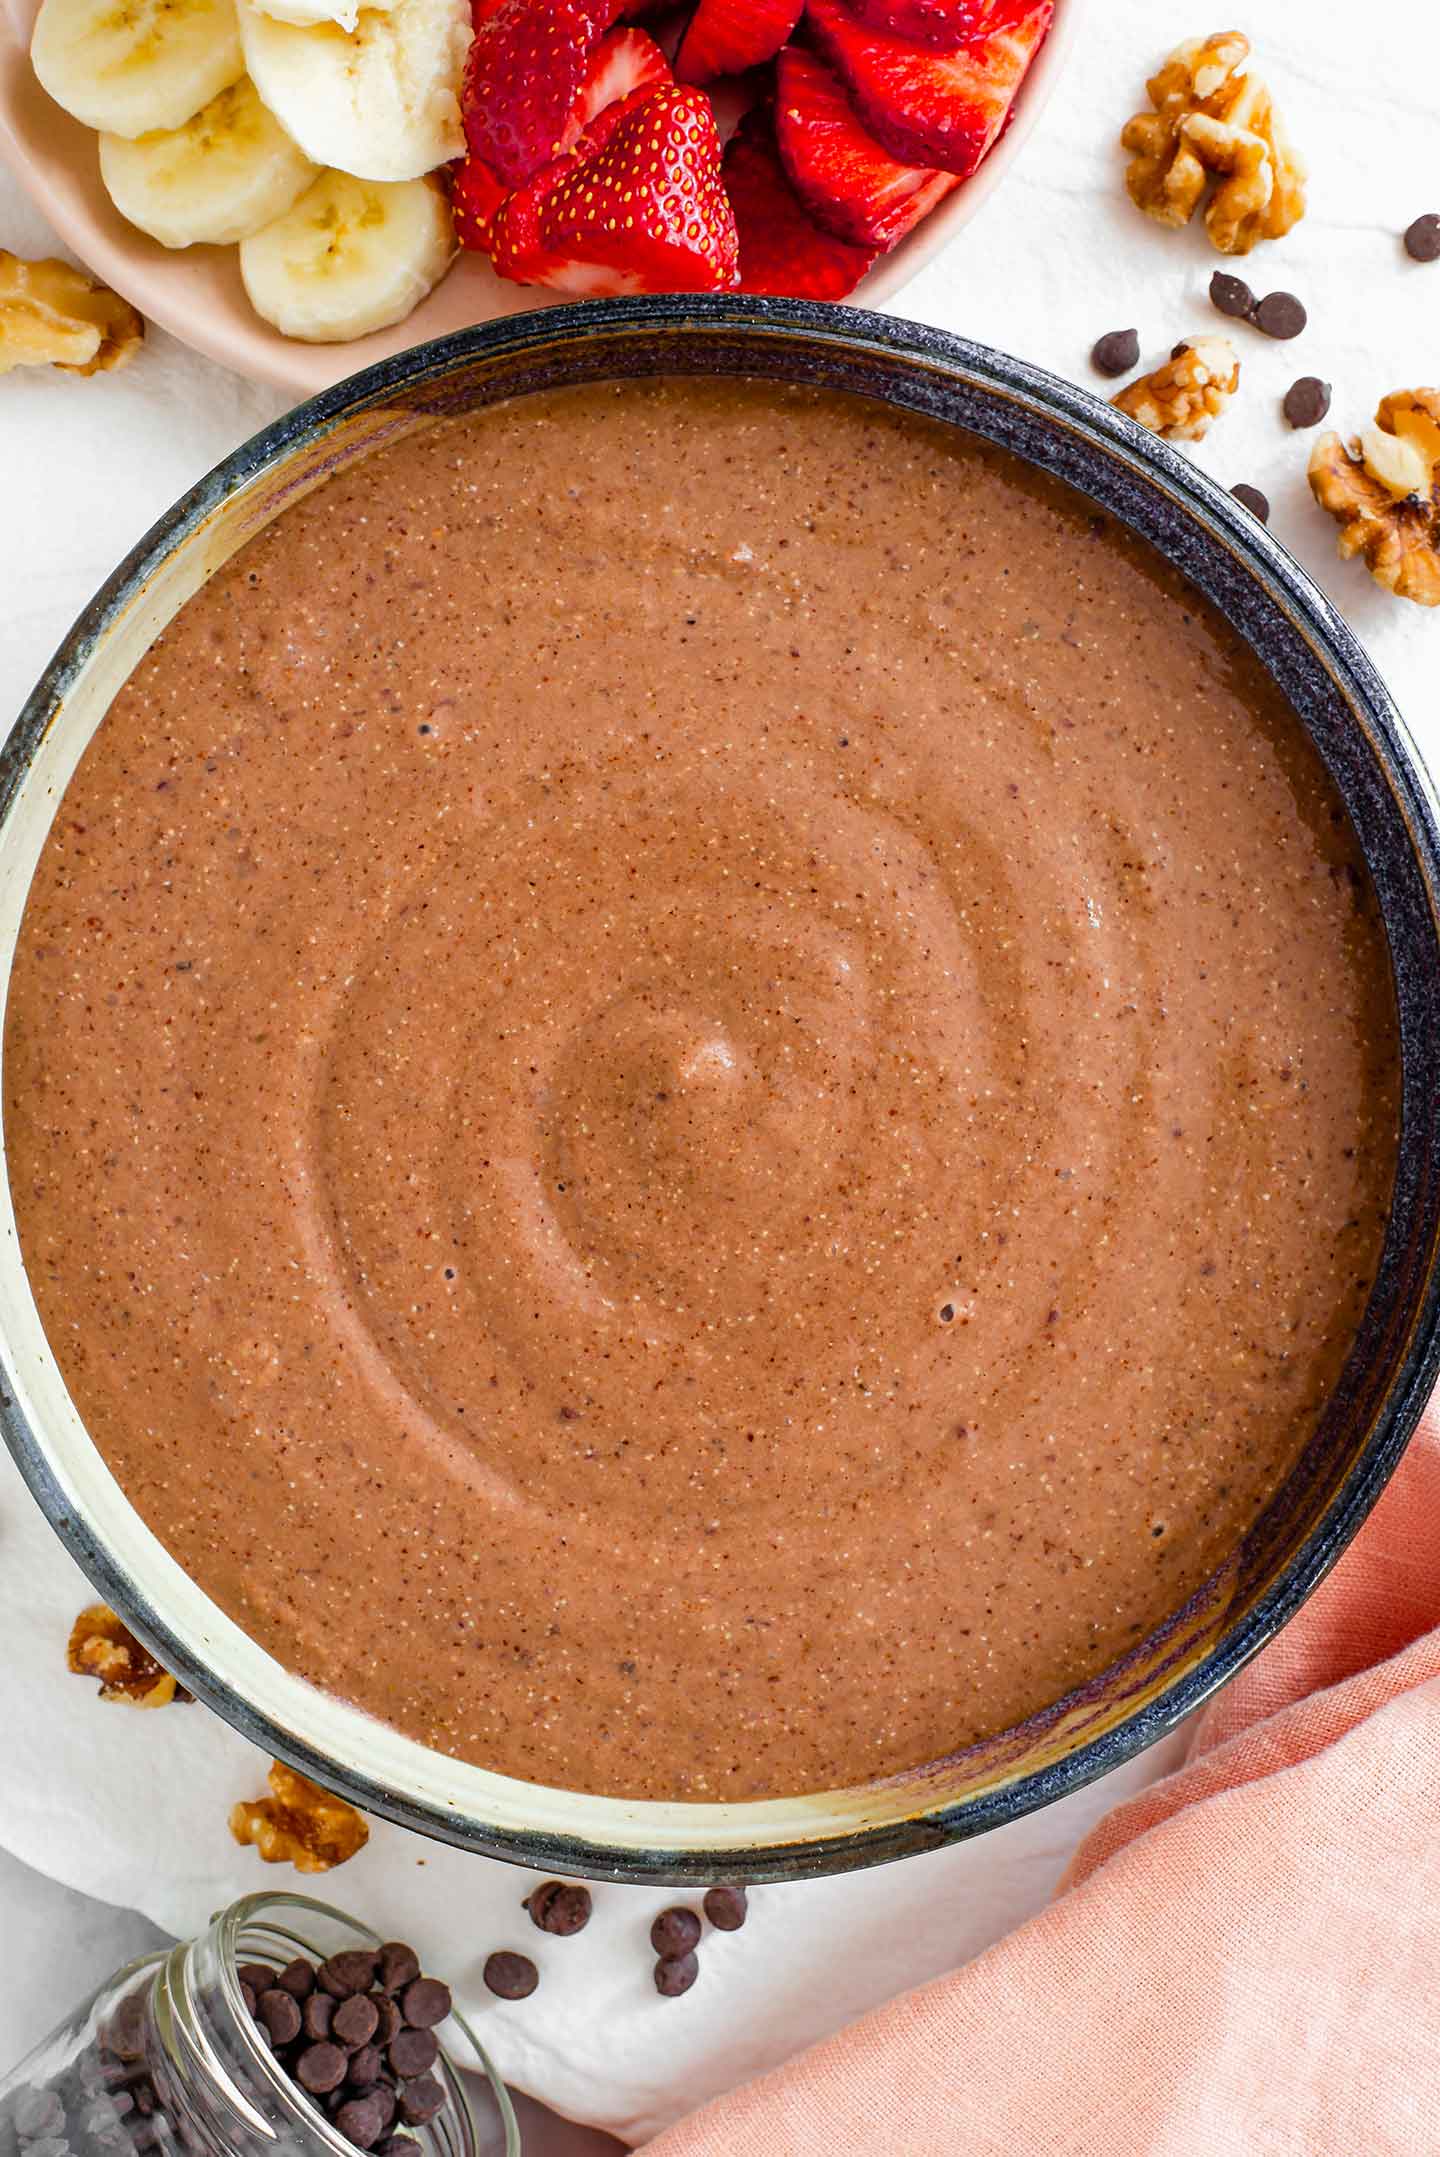 Top down view of a chocolate smoothie swirled in a wide shallow bowl. The smoothie is lightly speckled with the fine texture of blended quinoa.